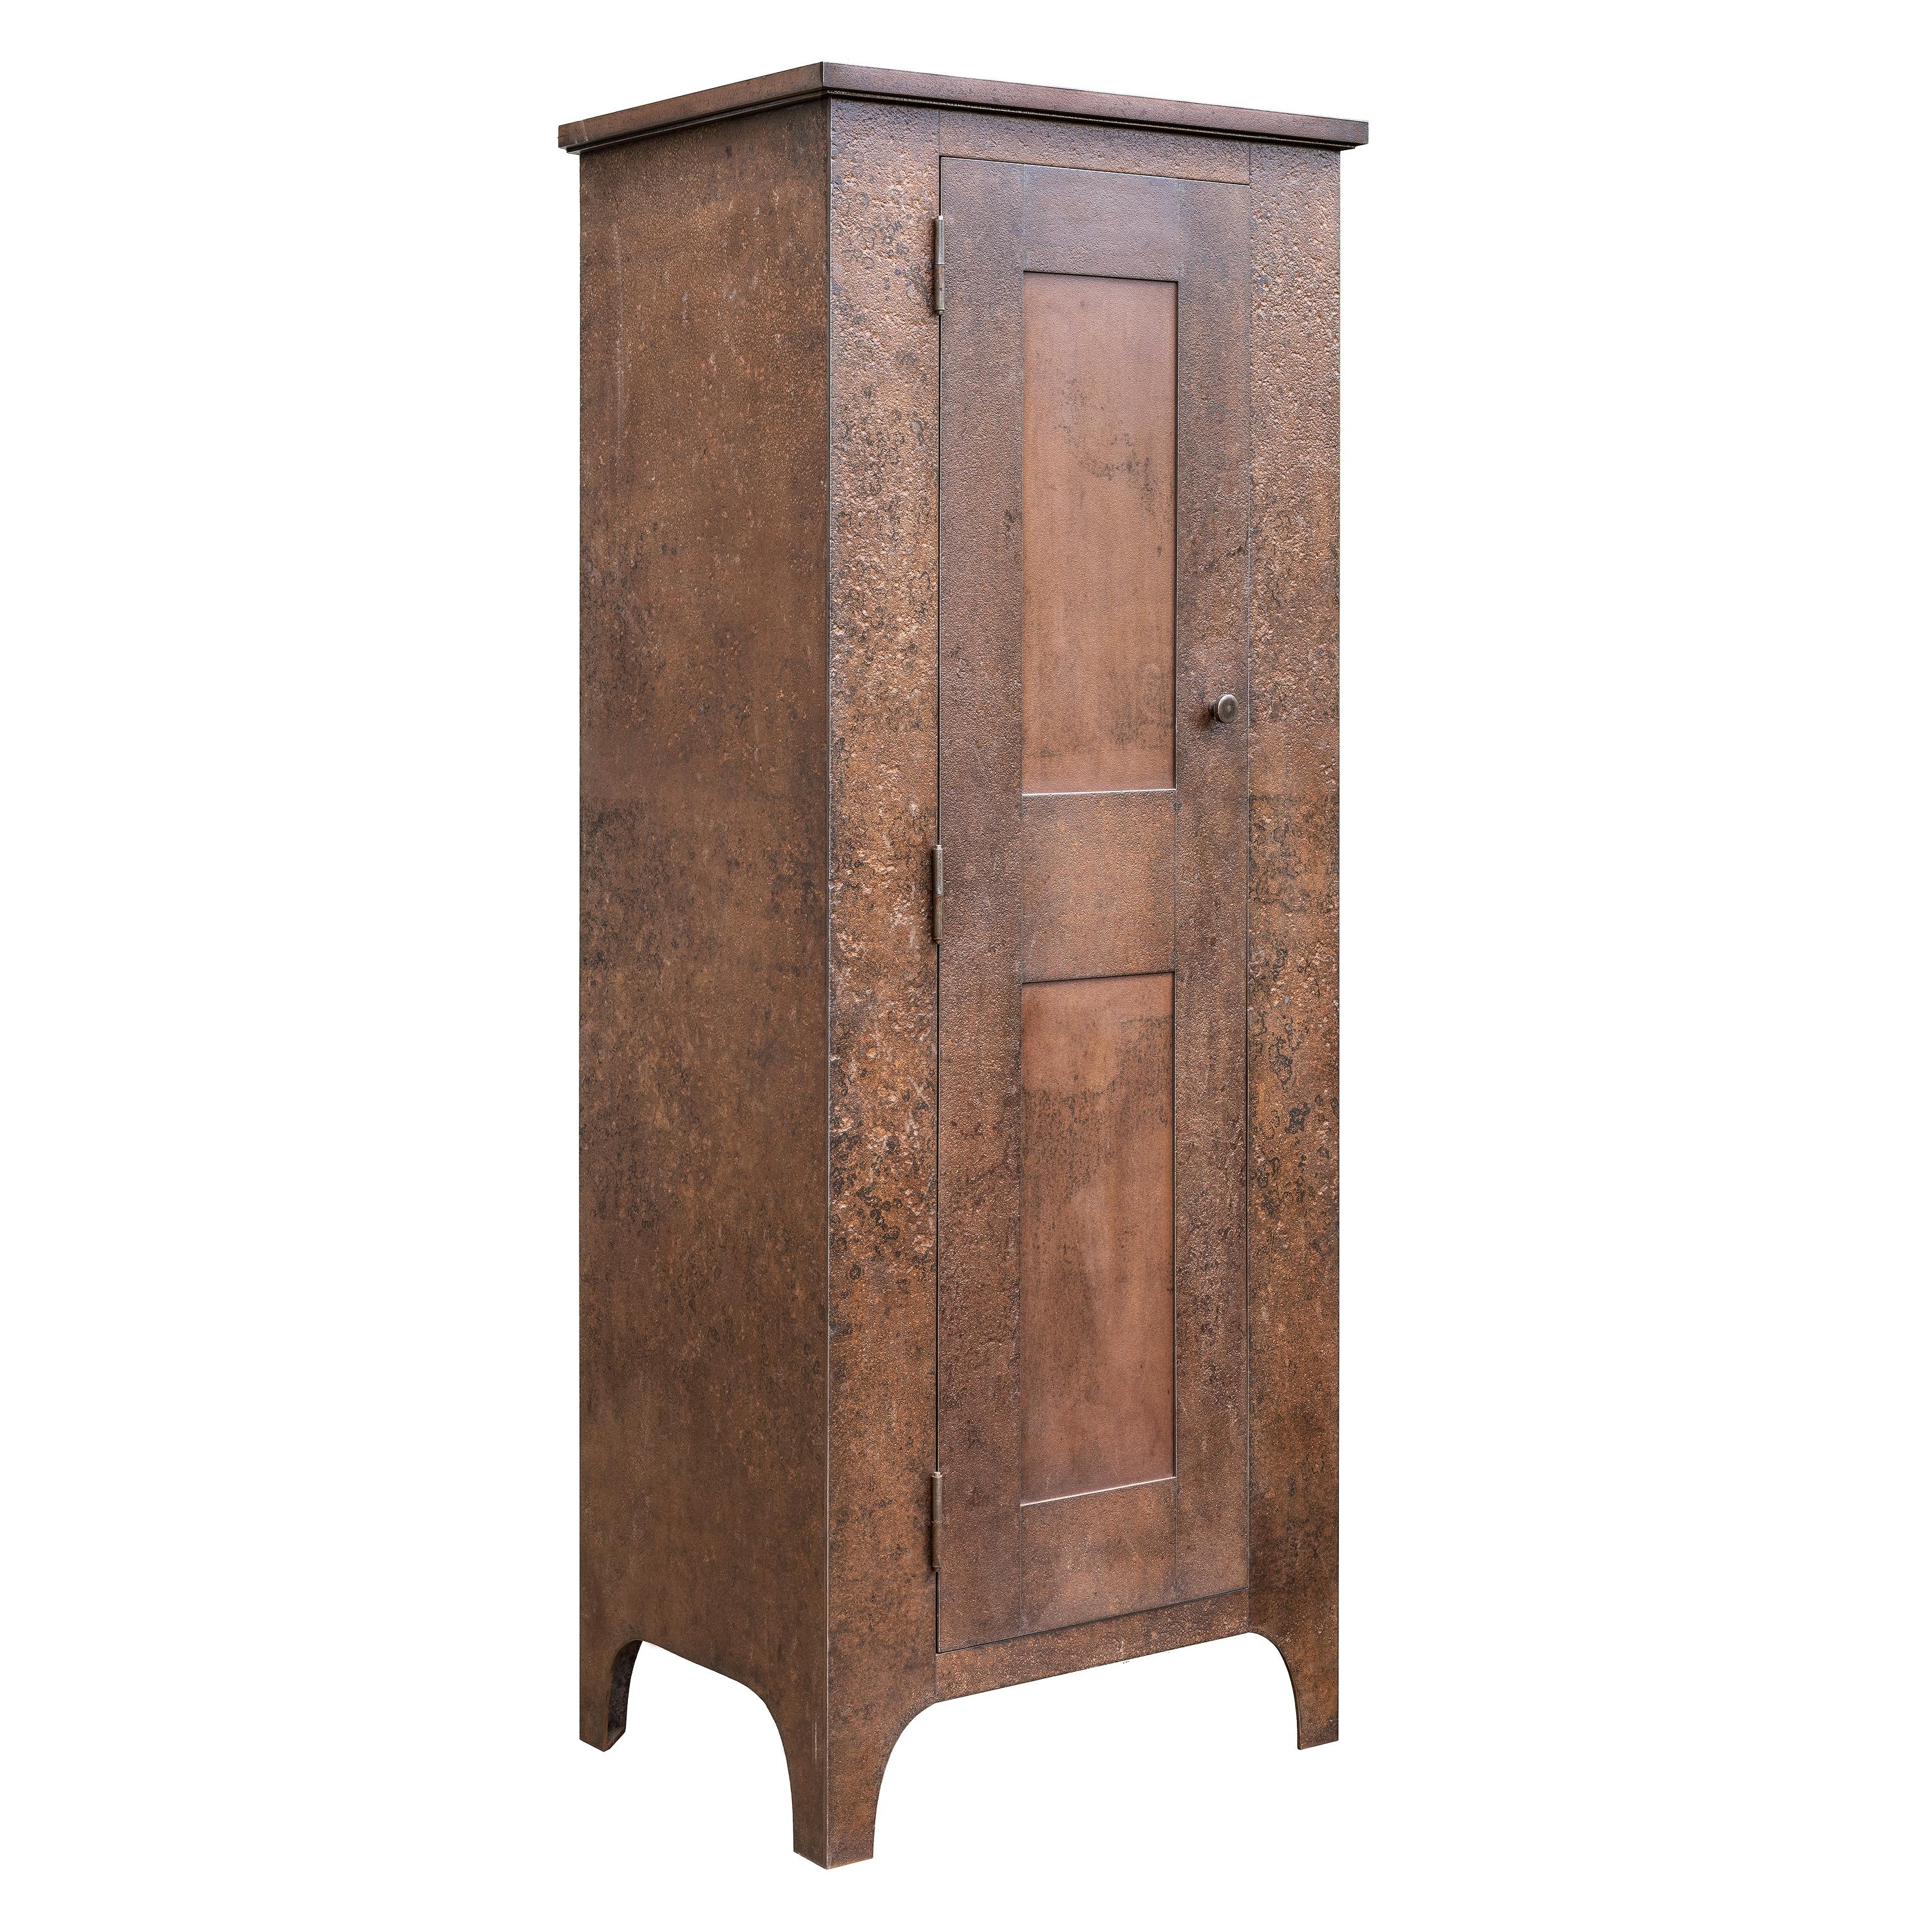 Jim Rose - Armoire, Shaker Style in Steel with Natural Rusted Patina